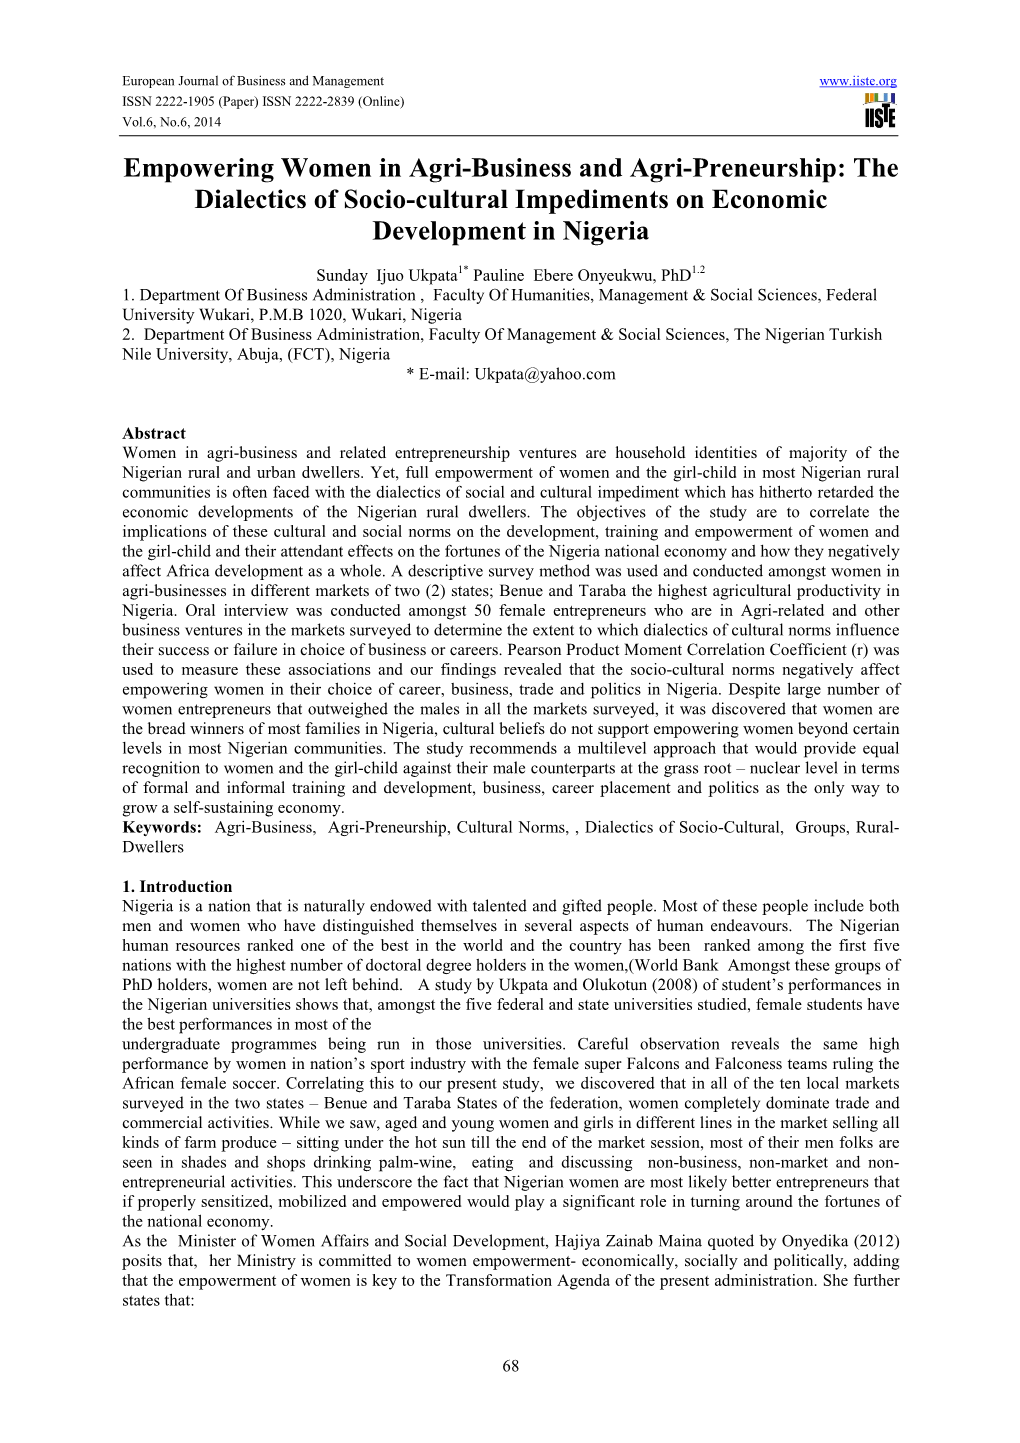 Empowering Women in Agri-Business and Agri-Preneurship: the Dialectics of Socio-Cultural Impediments on Economic Development in Nigeria